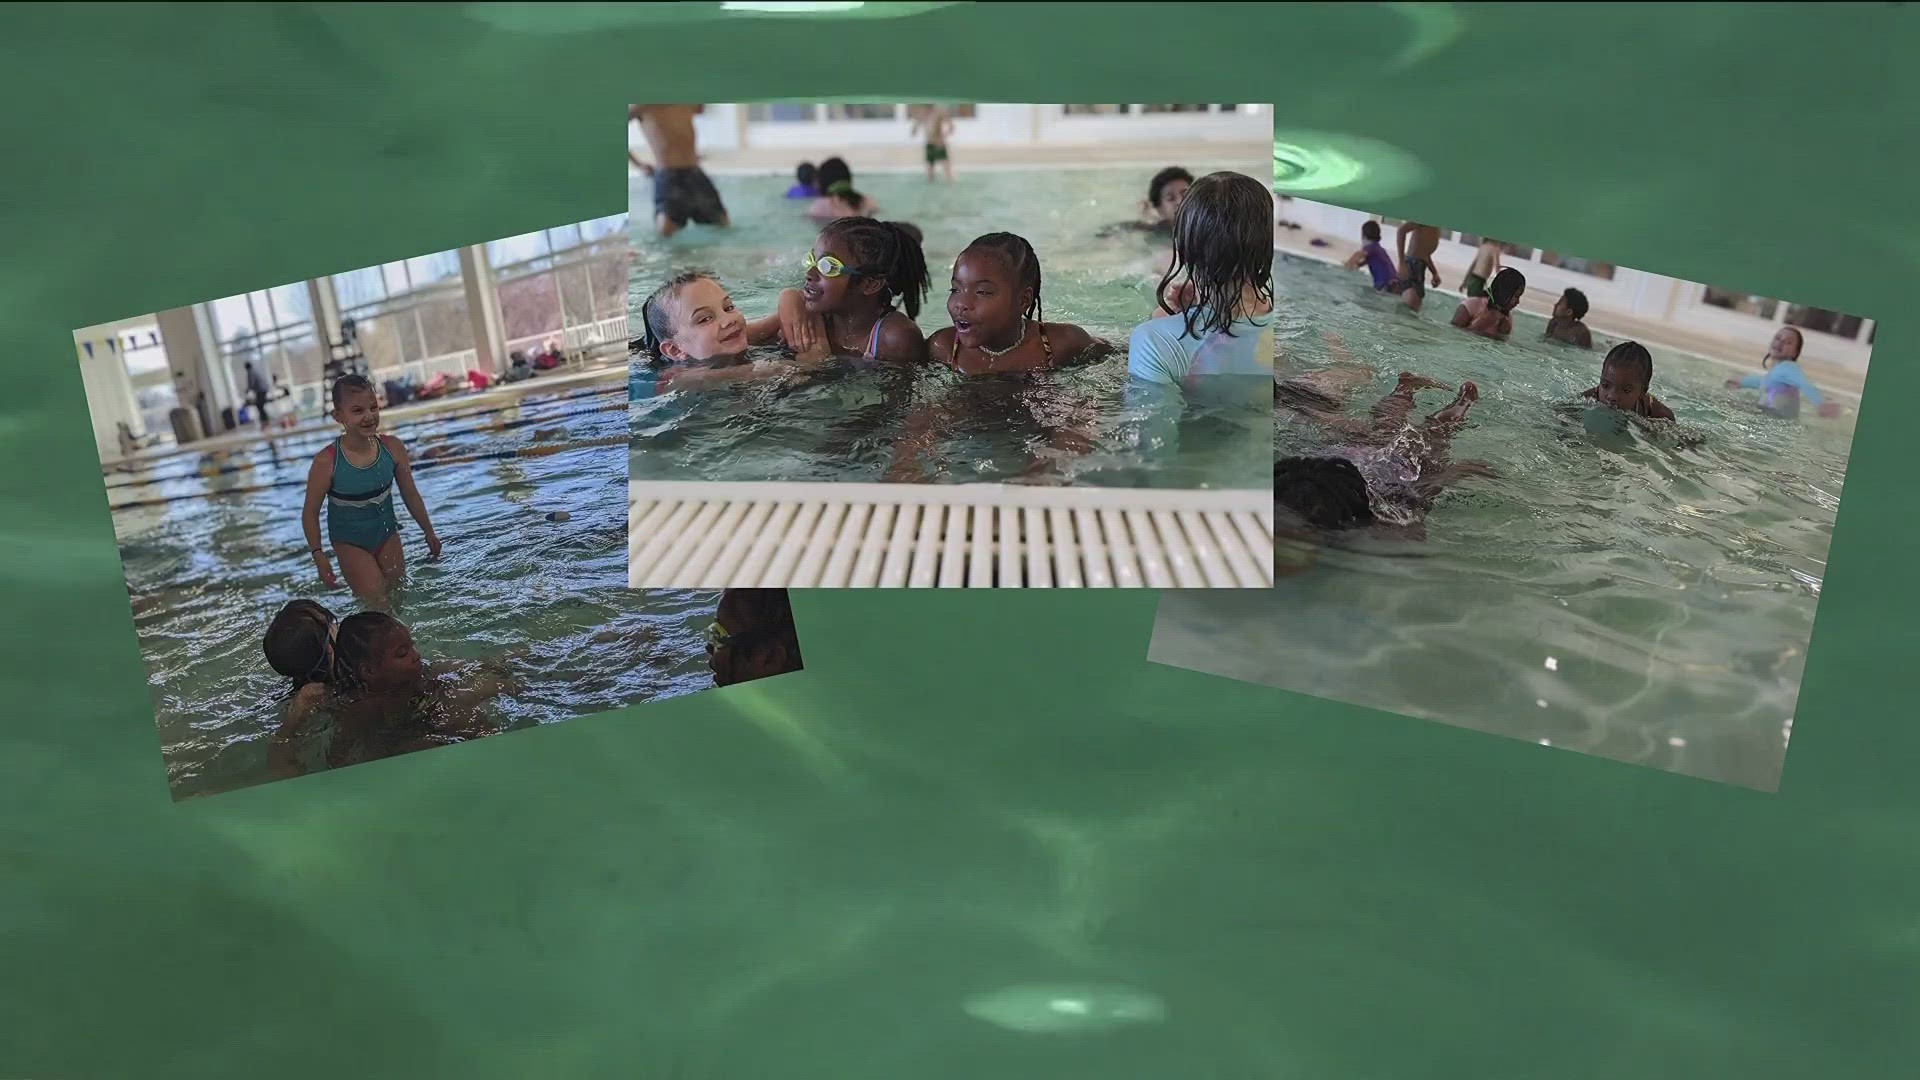 Most of the students at the The Morgan Oliver had no skills in the water until this summer.